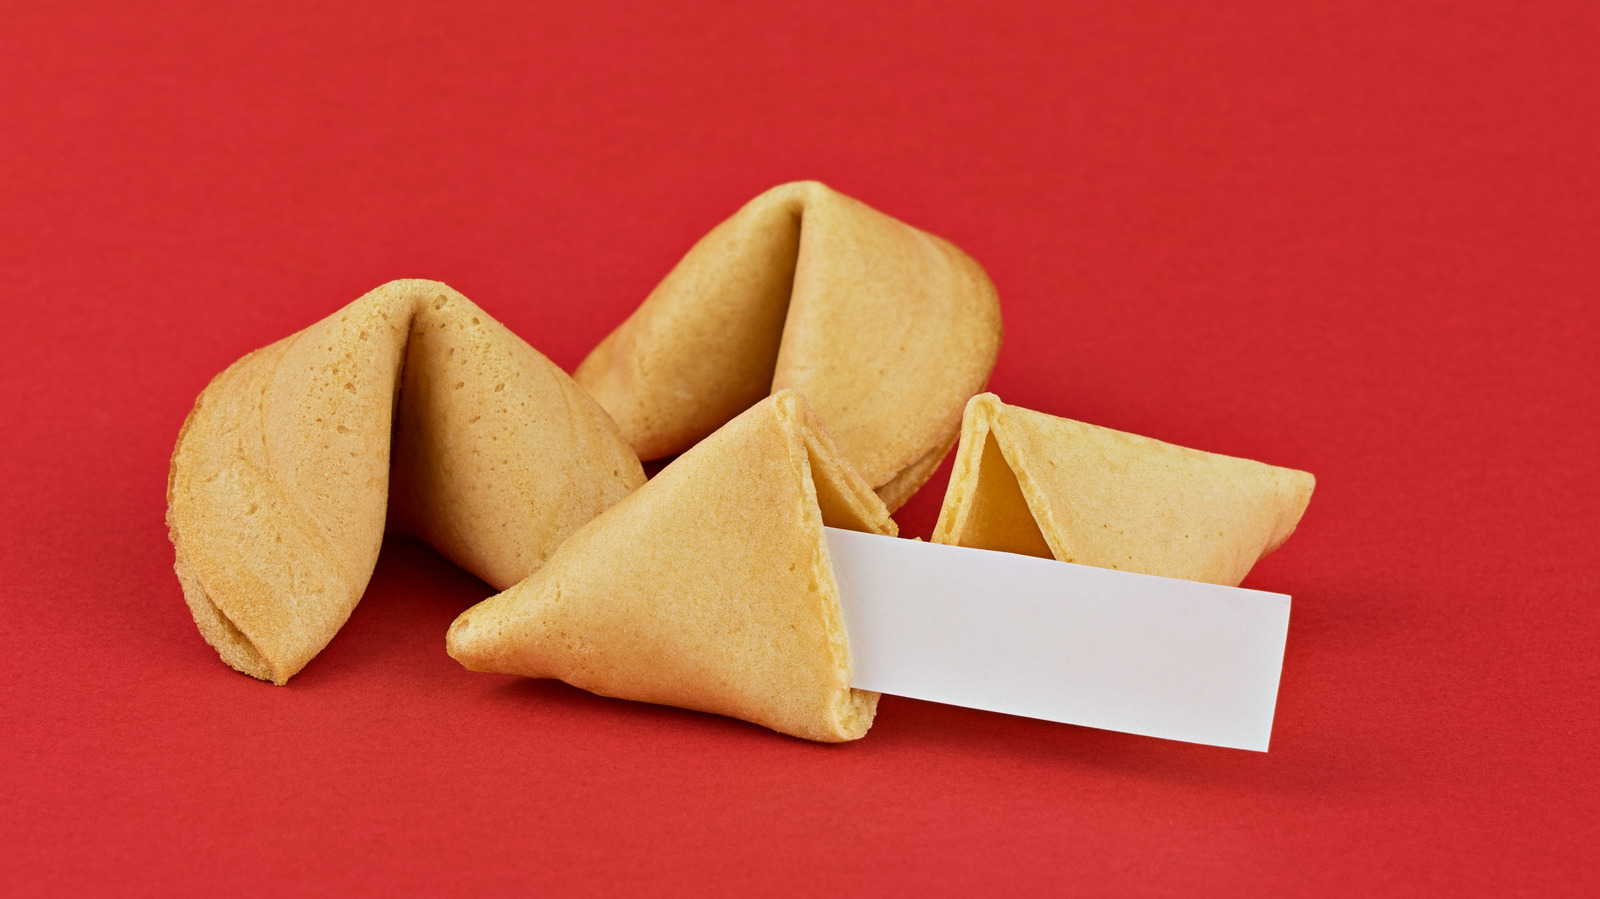 The Truth About Fortune Cookies